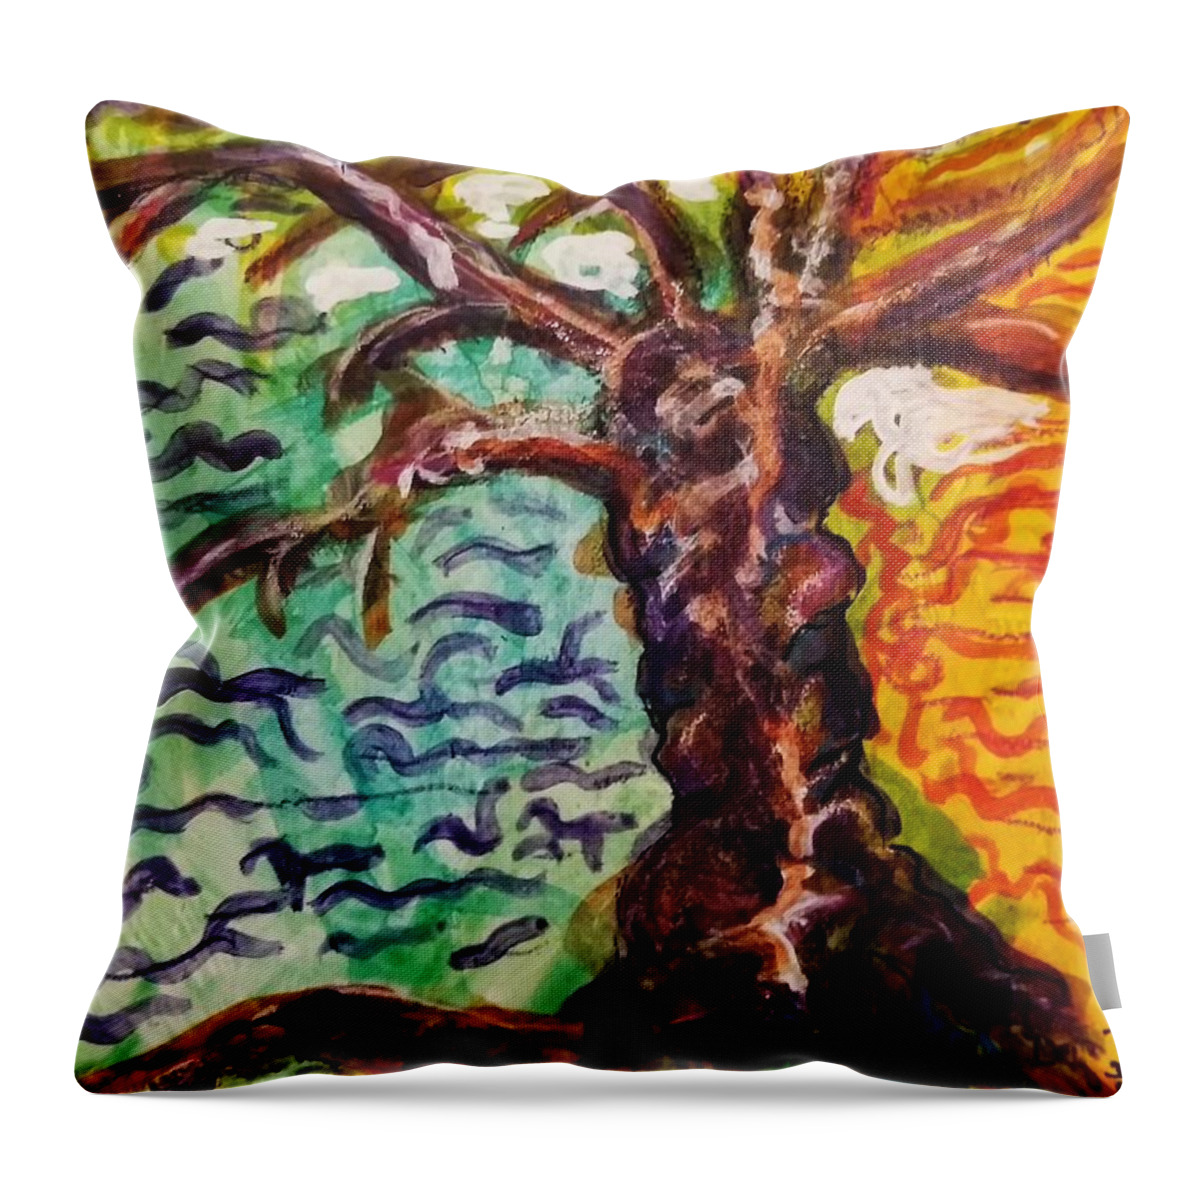 Tree Throw Pillow featuring the mixed media My Treefriend by Mimulux Patricia No